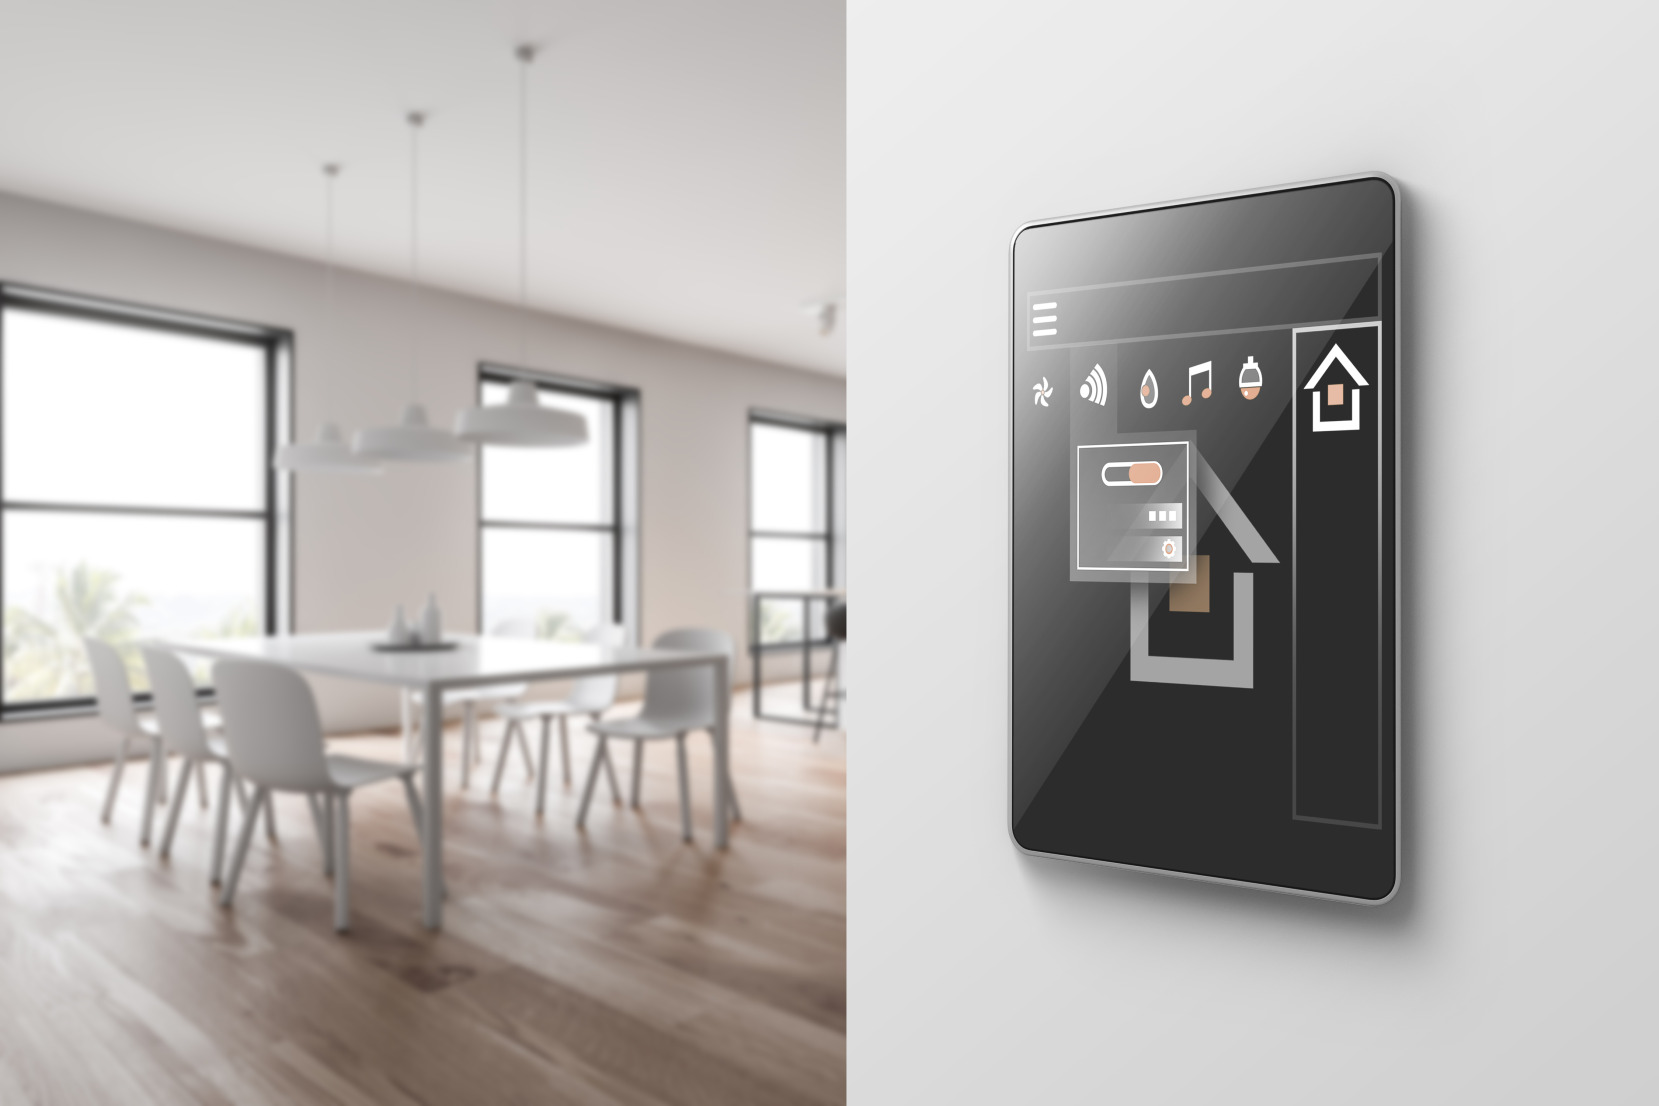 Close up of smart home system that controls lights, temperature, alarms, and more in a new home construction.